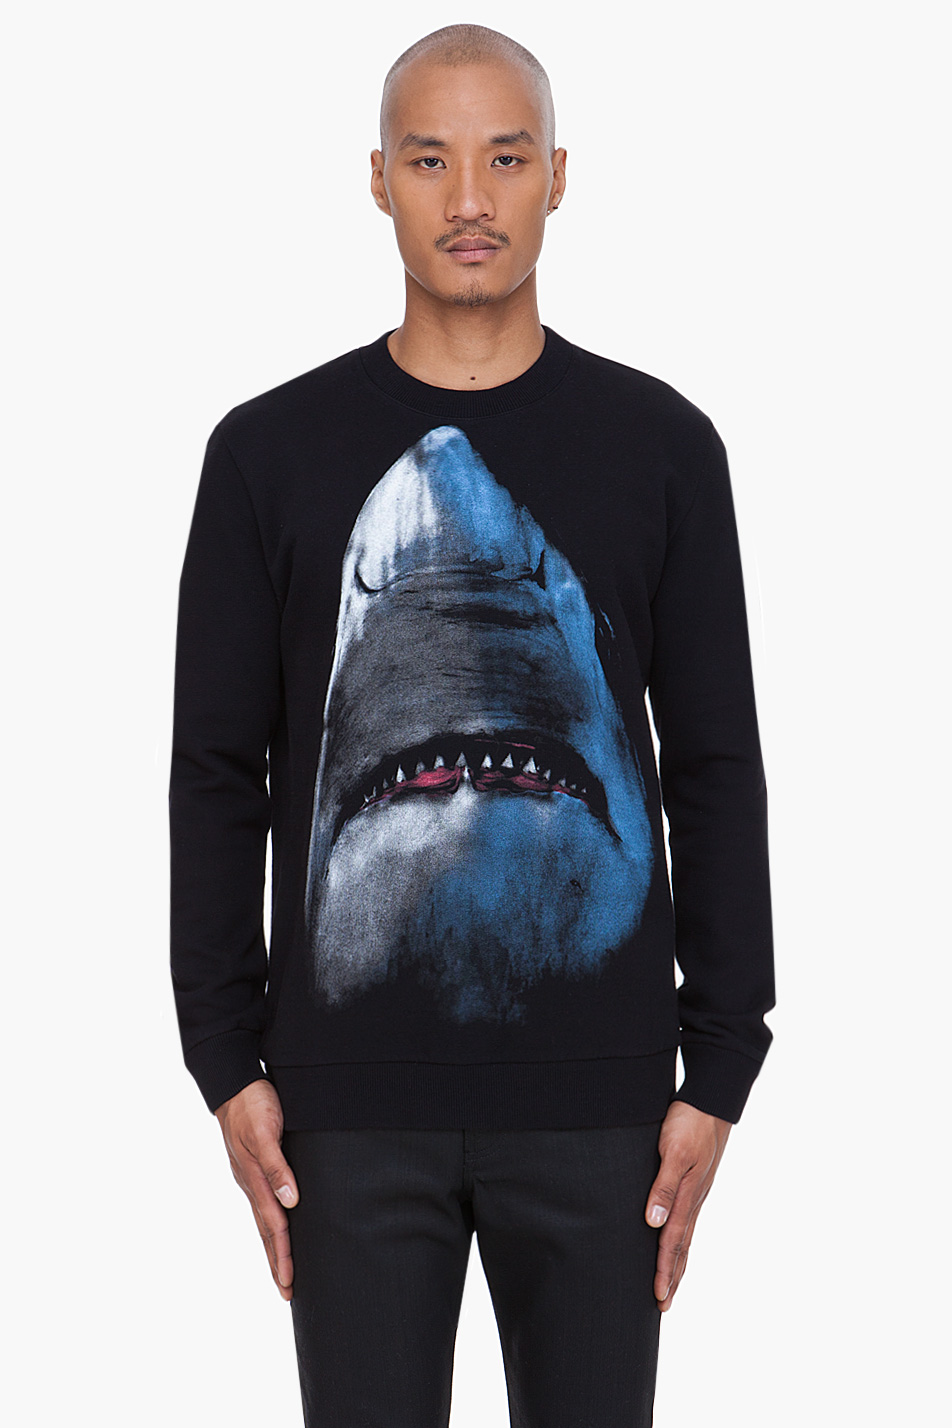 Lyst - Givenchy Shark Print Sweater in Black for Men